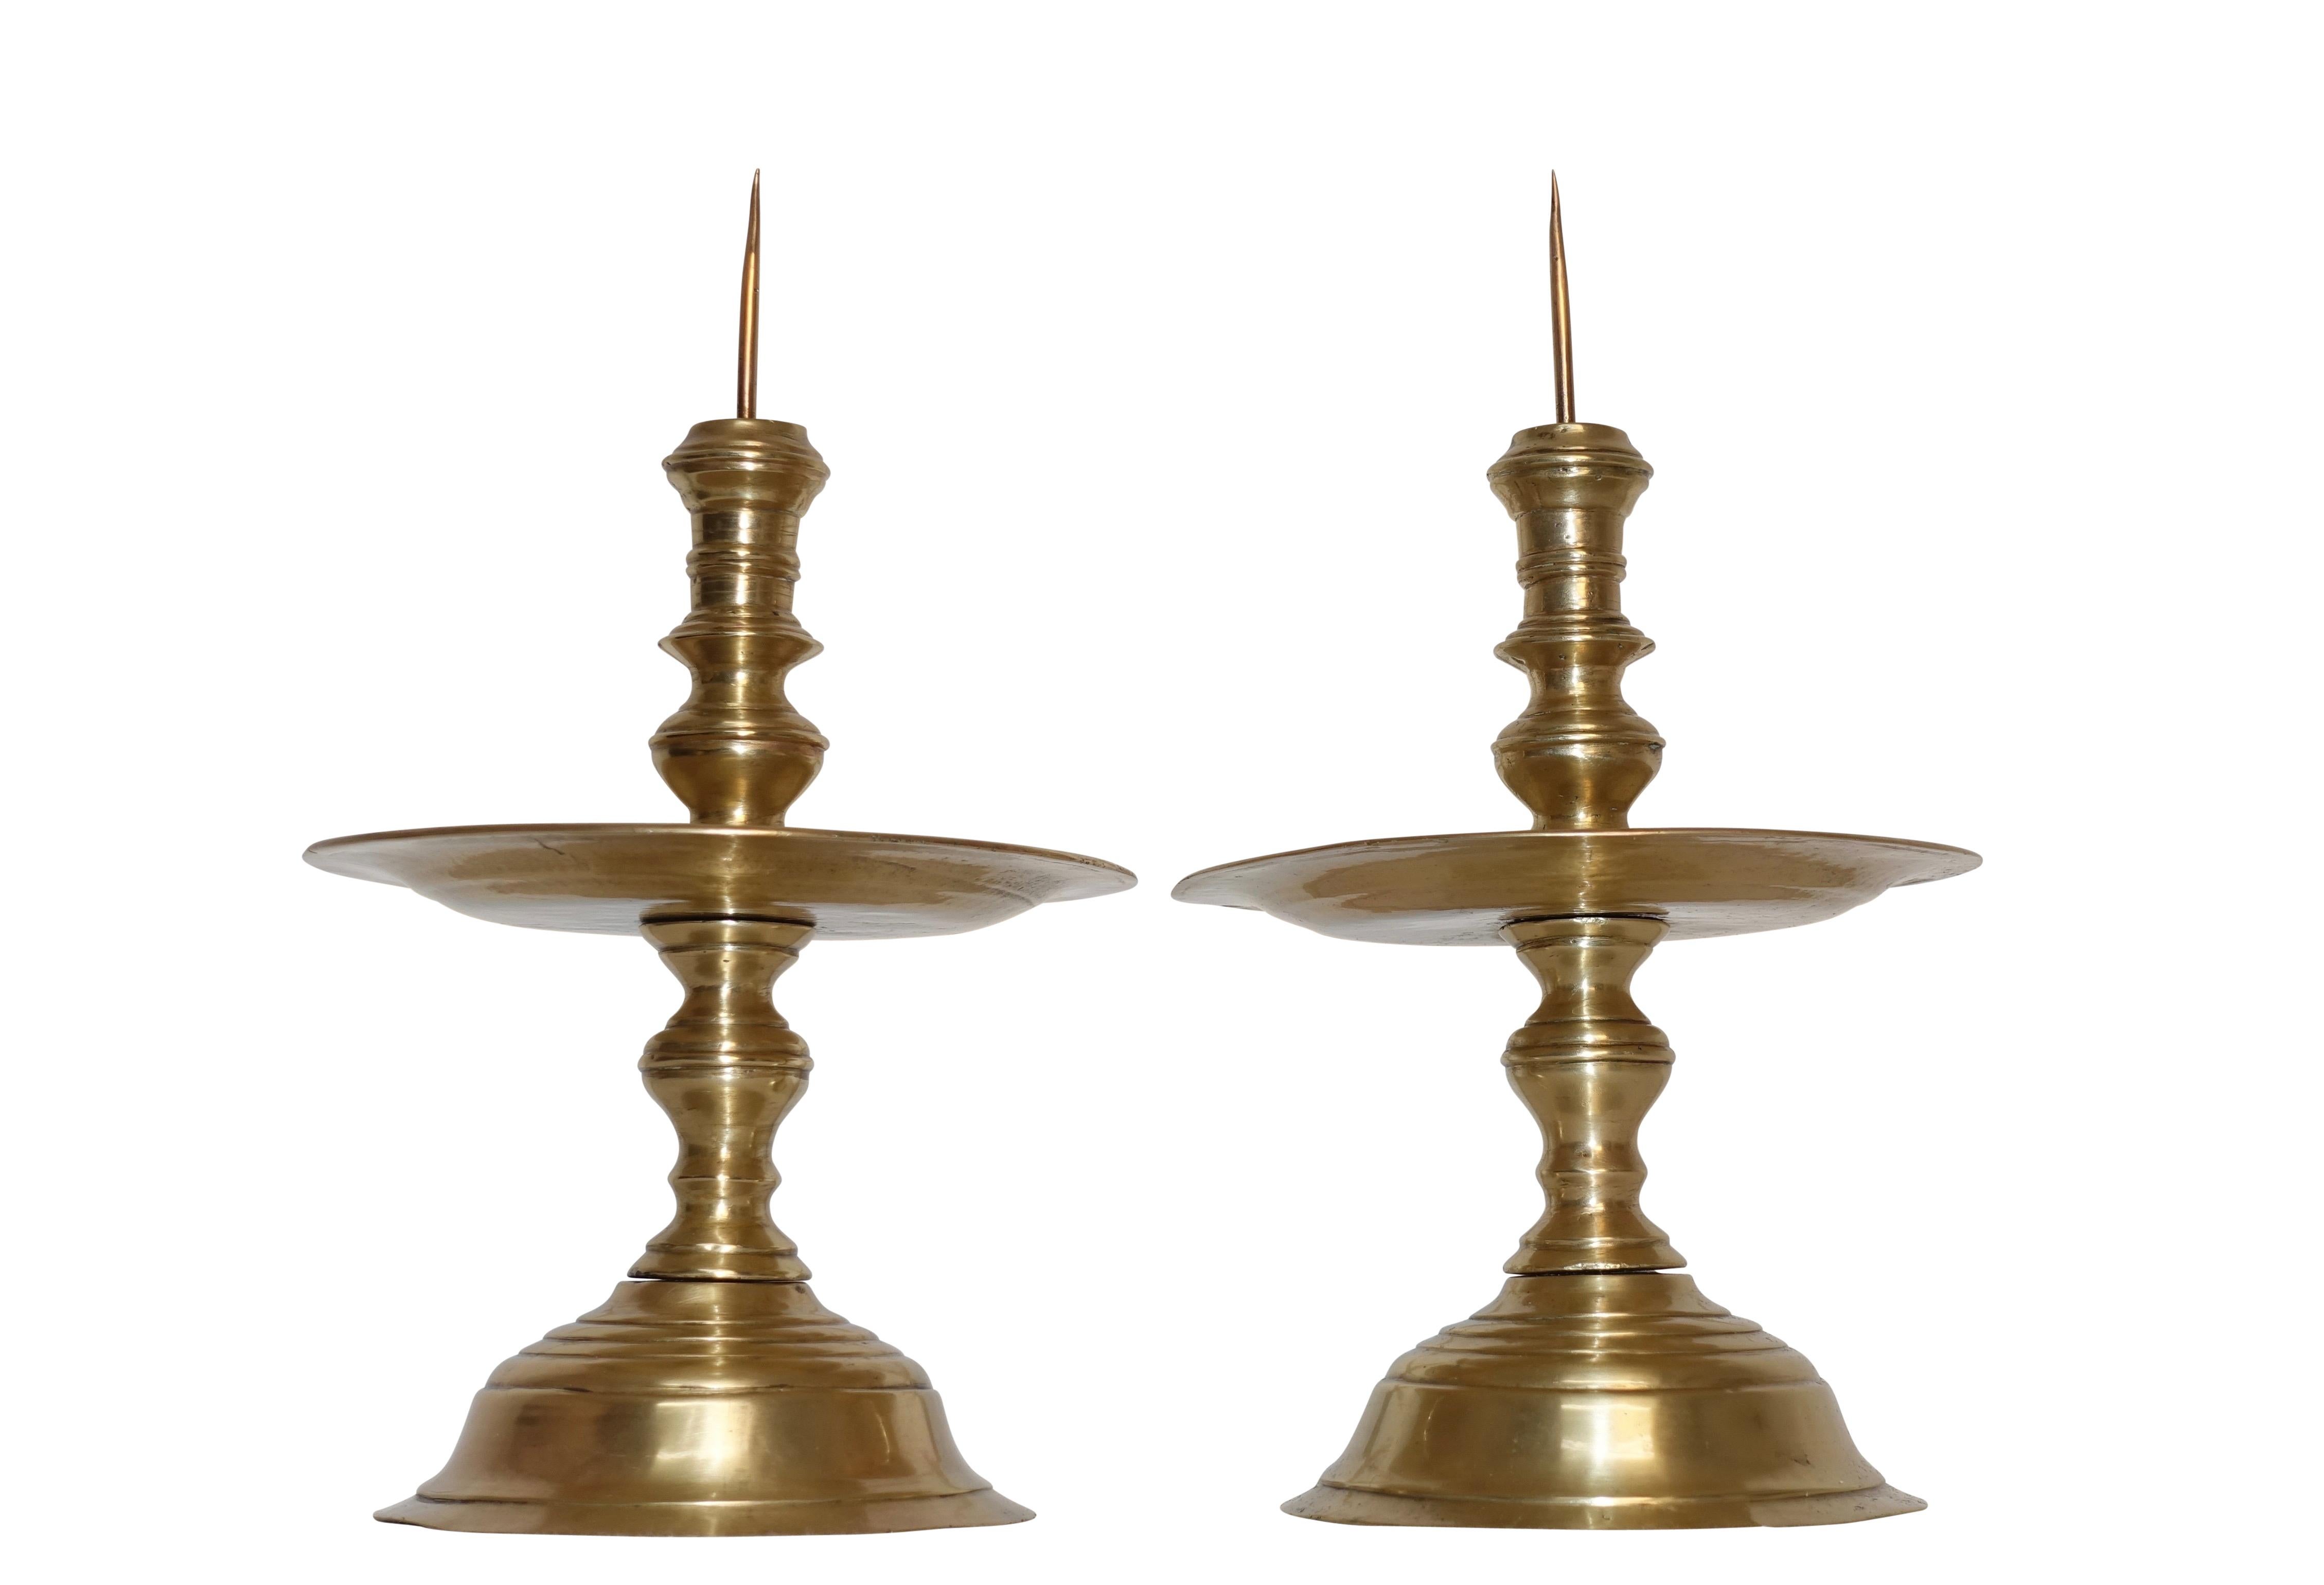 A magnificent pair of early hand spun brass pricket candleholders with turned baluster shape centre column above and below the exaggerated drip plates, Dutch, circa 1750.